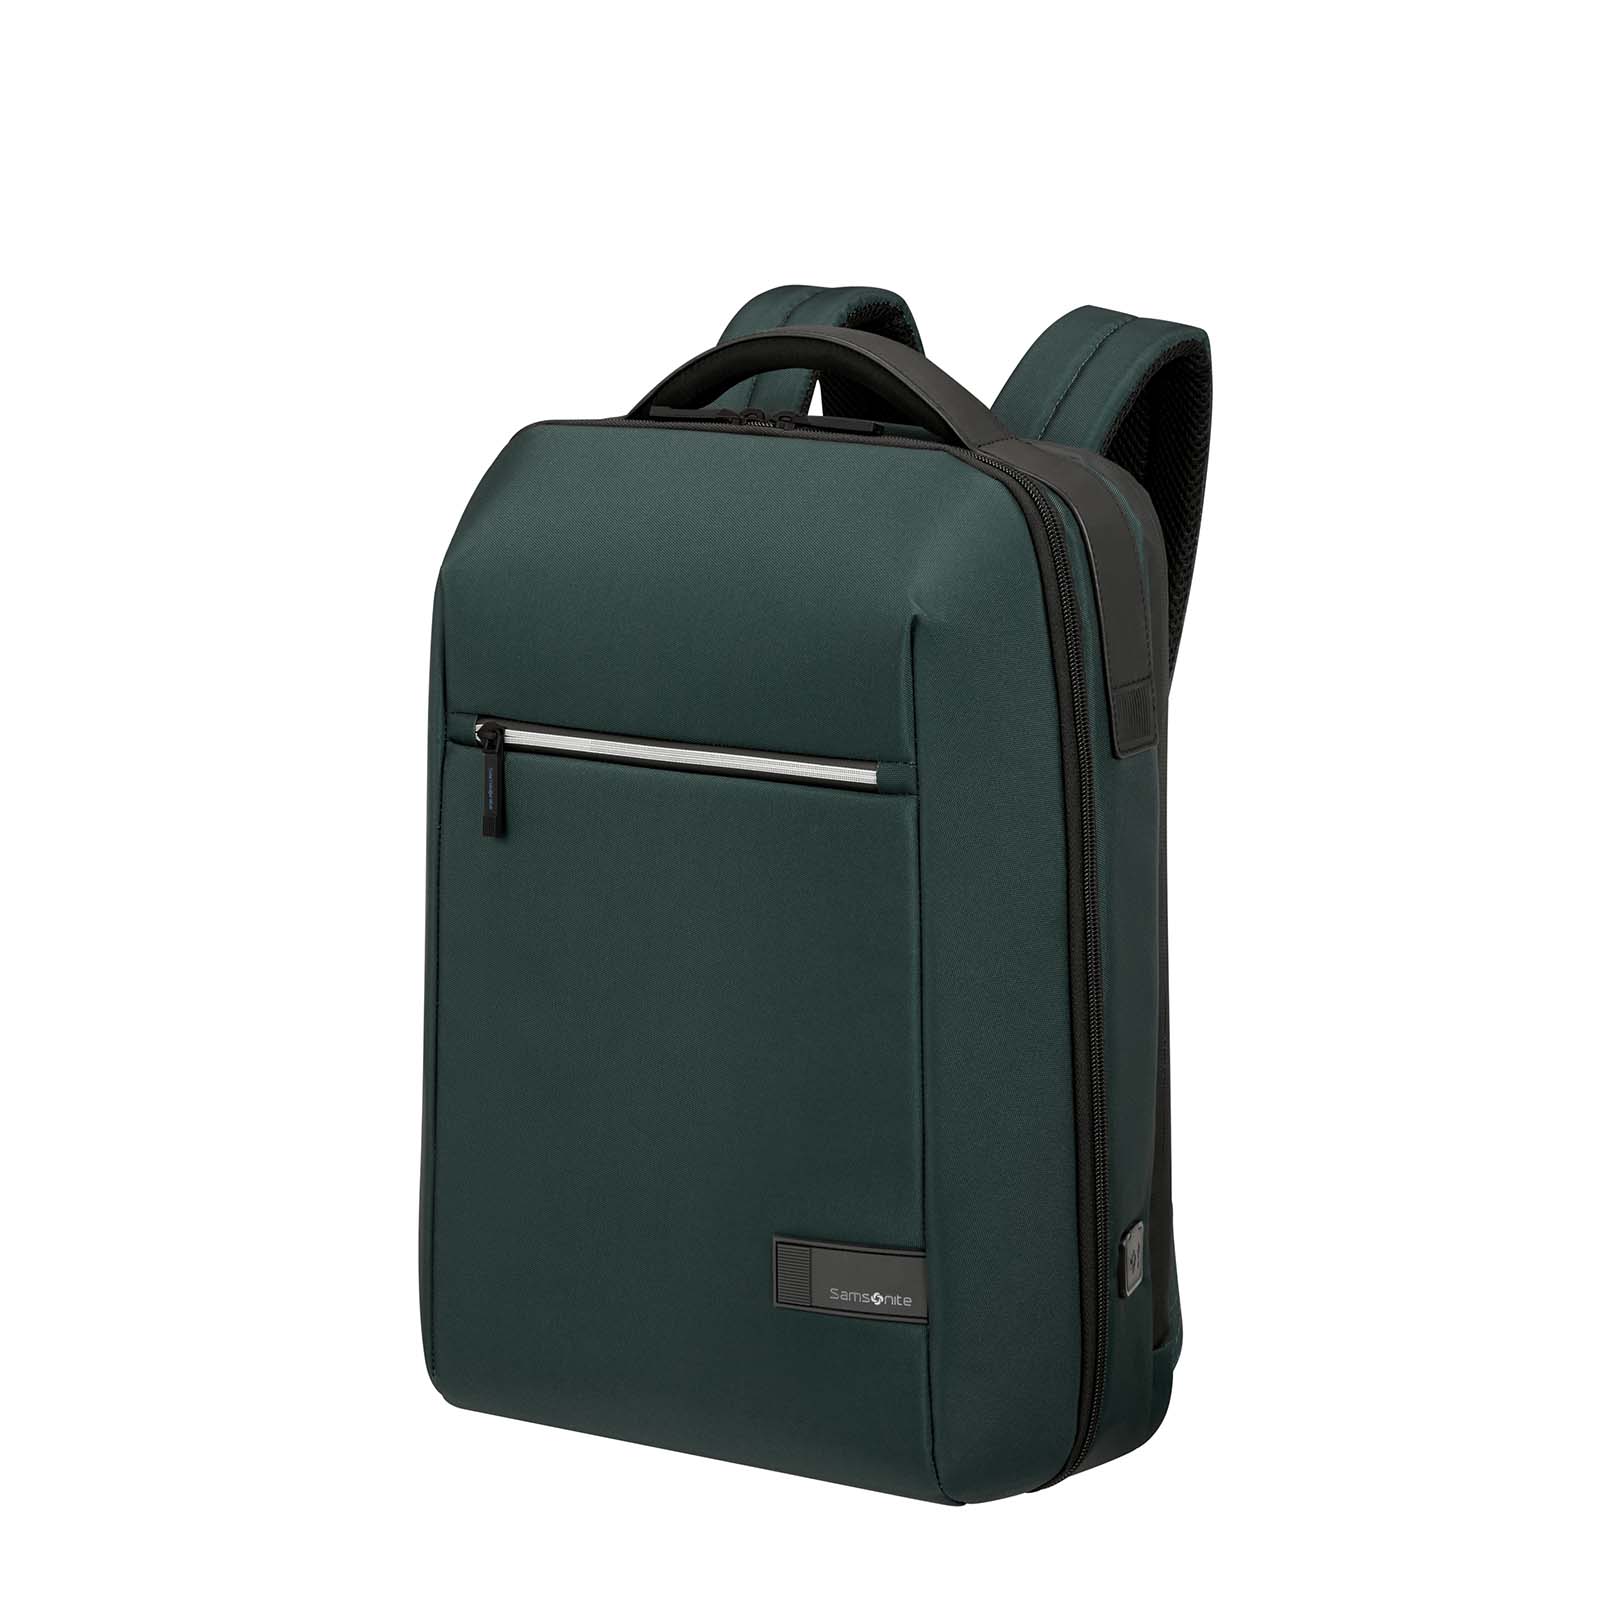 Samsonite-Litepoint-15-Inch-Laptop-Backpack-Urban-Green-Front-Angle